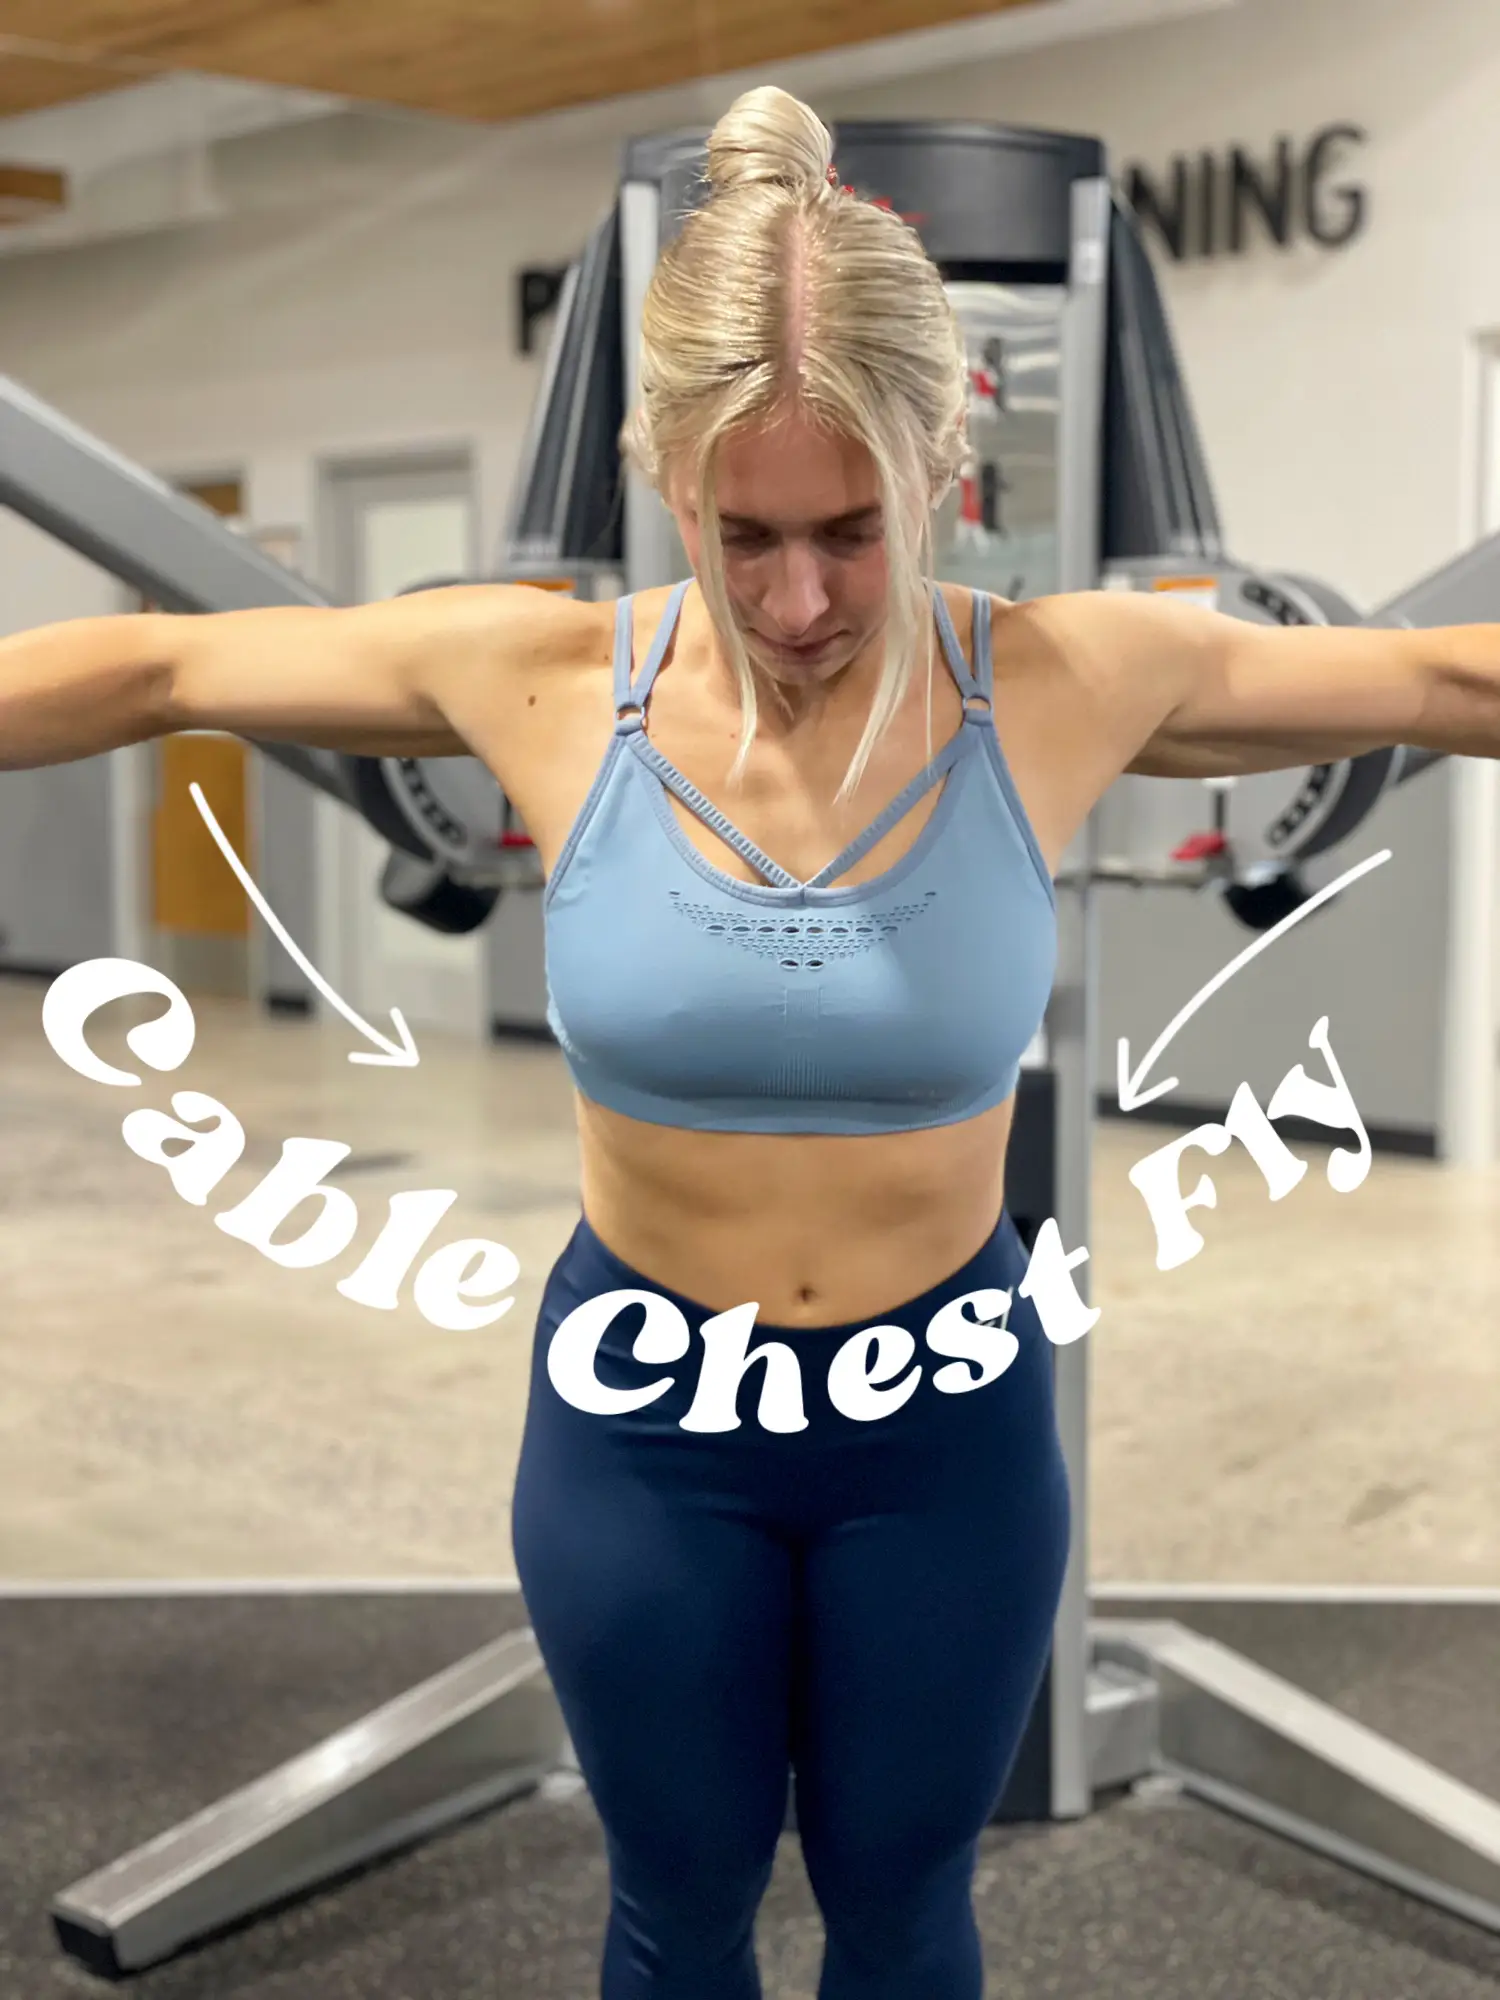 Toned Chest Workout For The Girls! 💁🏼‍♀️, Gallery posted by Taylor 🦋